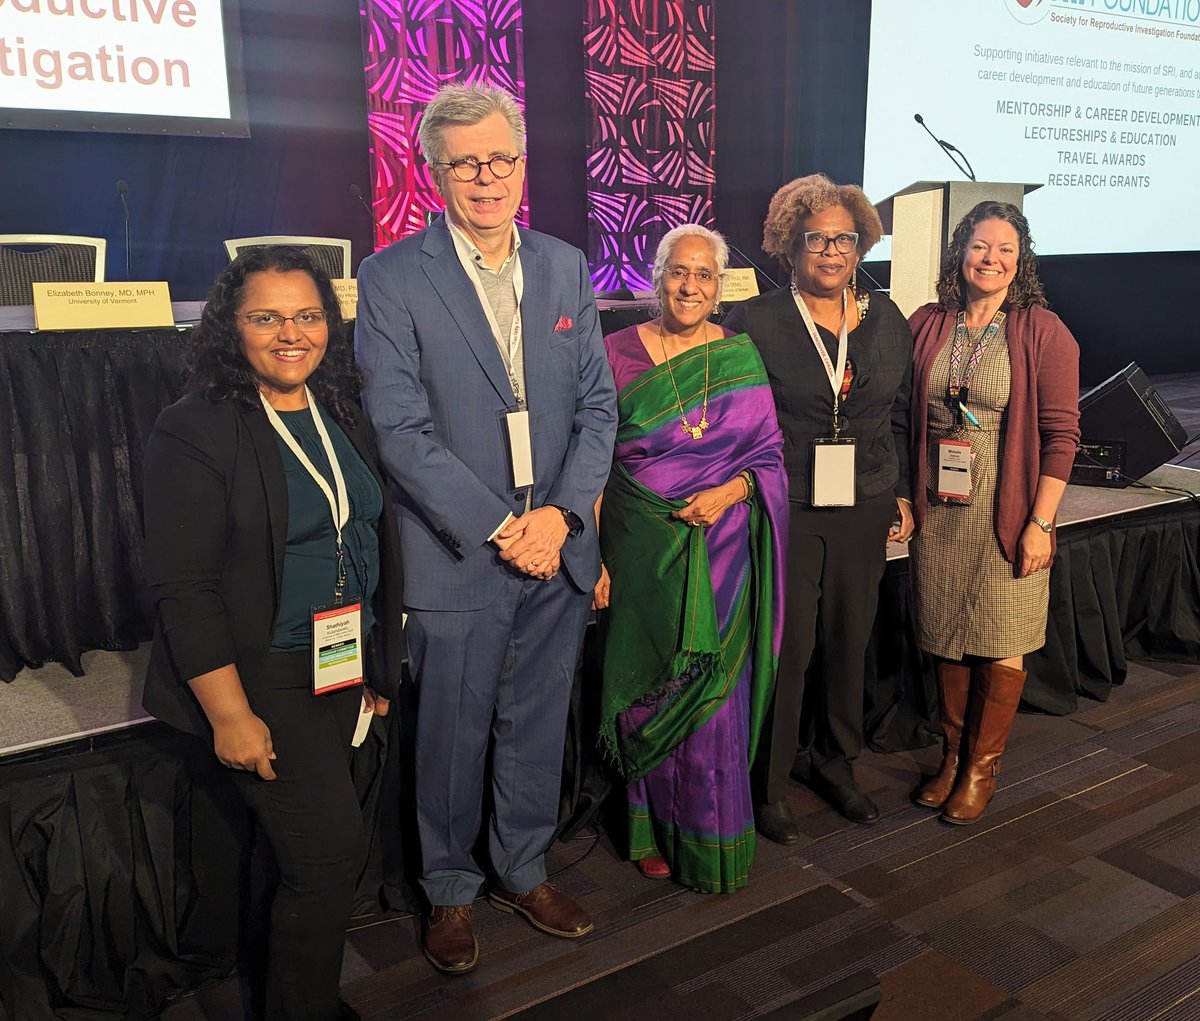 Thank you to our wonderful speakers @BoJacobsson Dr. Bonney & Dr. Vedam @BirthPlaceLab on their insightful thoughts on addressing health equity on a global, community and a local scale. @SRIWomensHealth #DEIforum #HealthEquity #teamwork #inspired @michelle_d #SRI2024